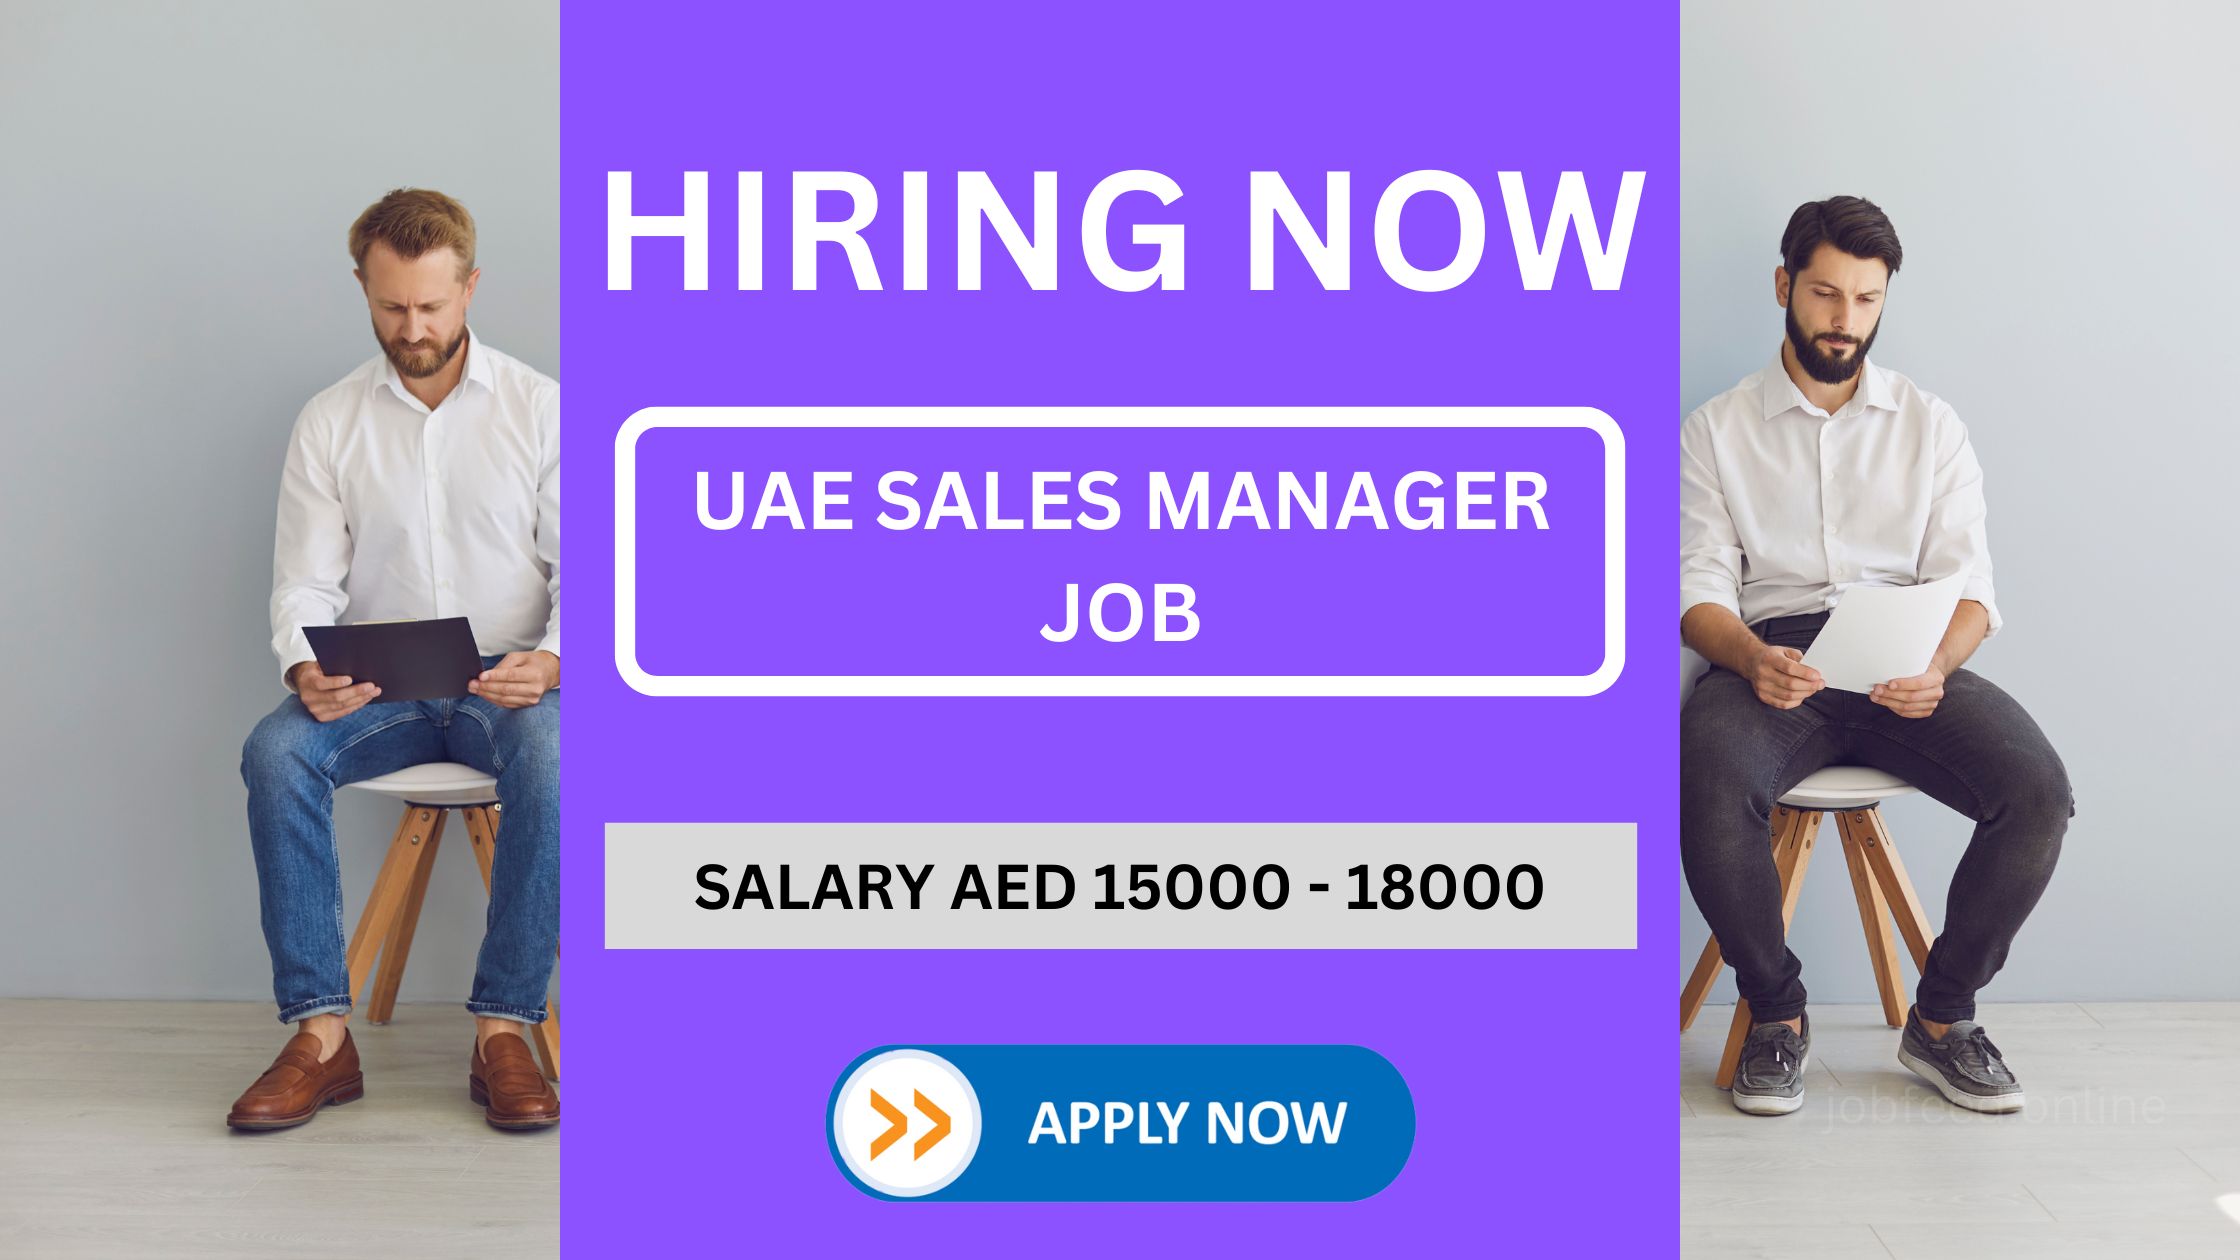 UAE Sales Manager Job in Real Estate - Salary Range of AED 15000 - 18000